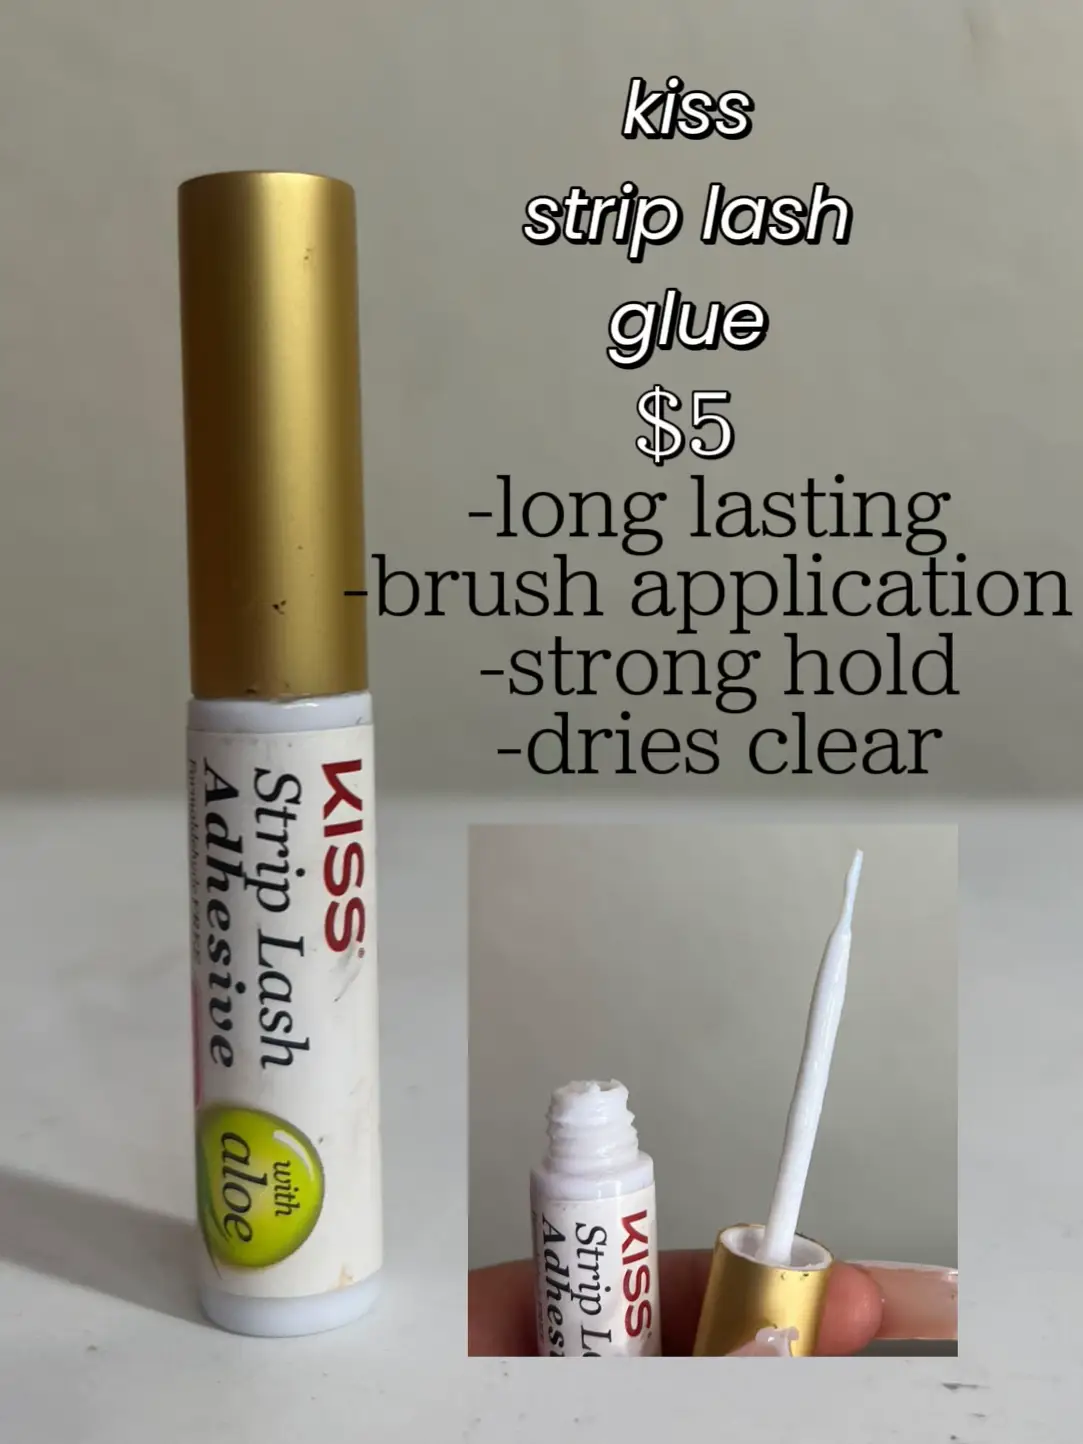  A bottle of Kiss Strip lash glue is shown with a brush